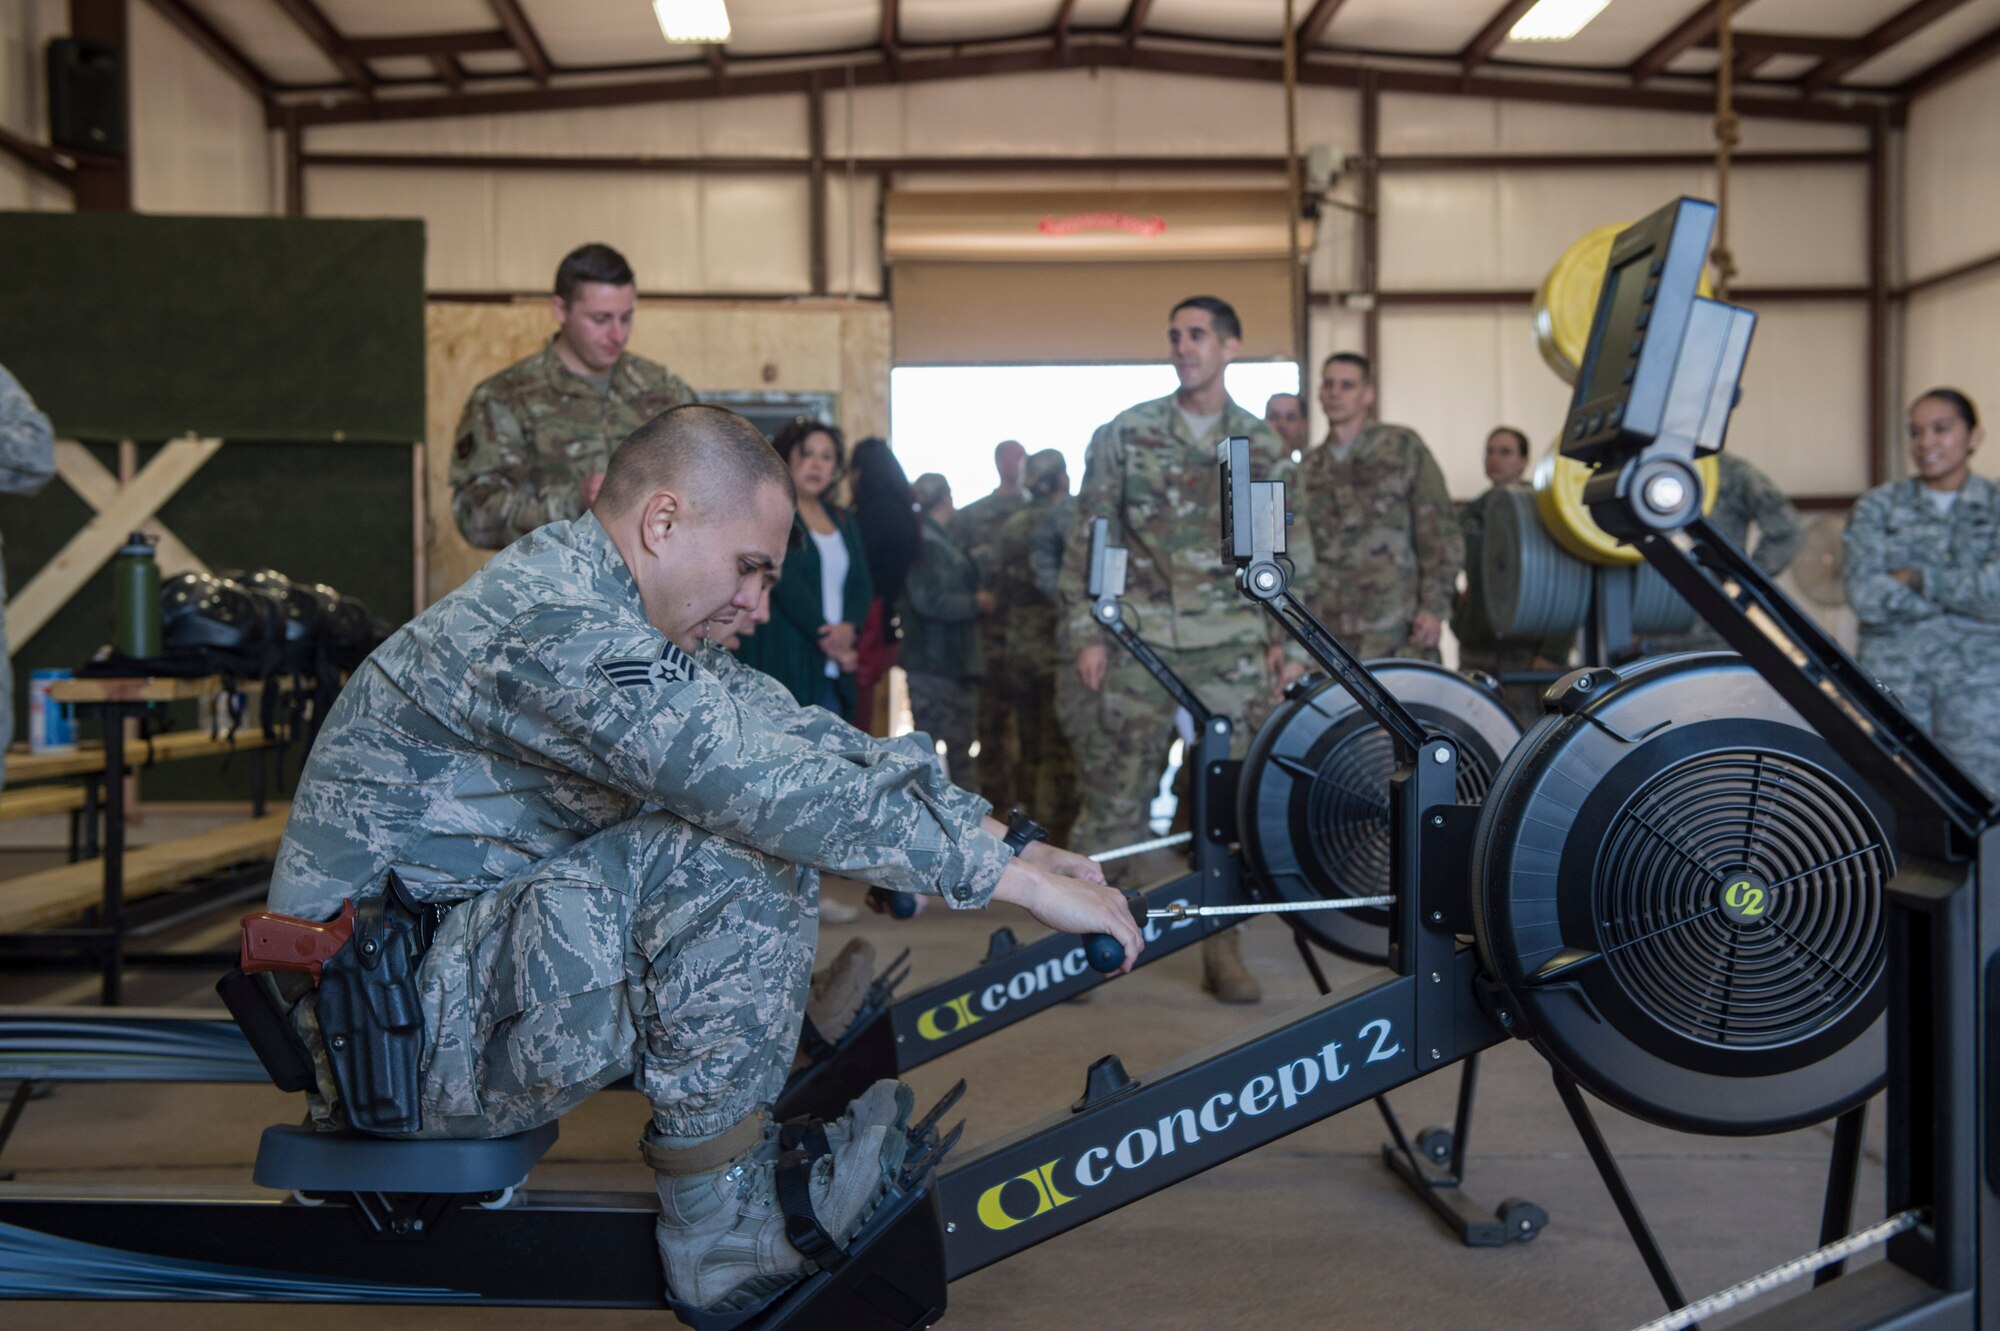 Members of the 97th Security Forces Squadron staff support team utilize rowing machines